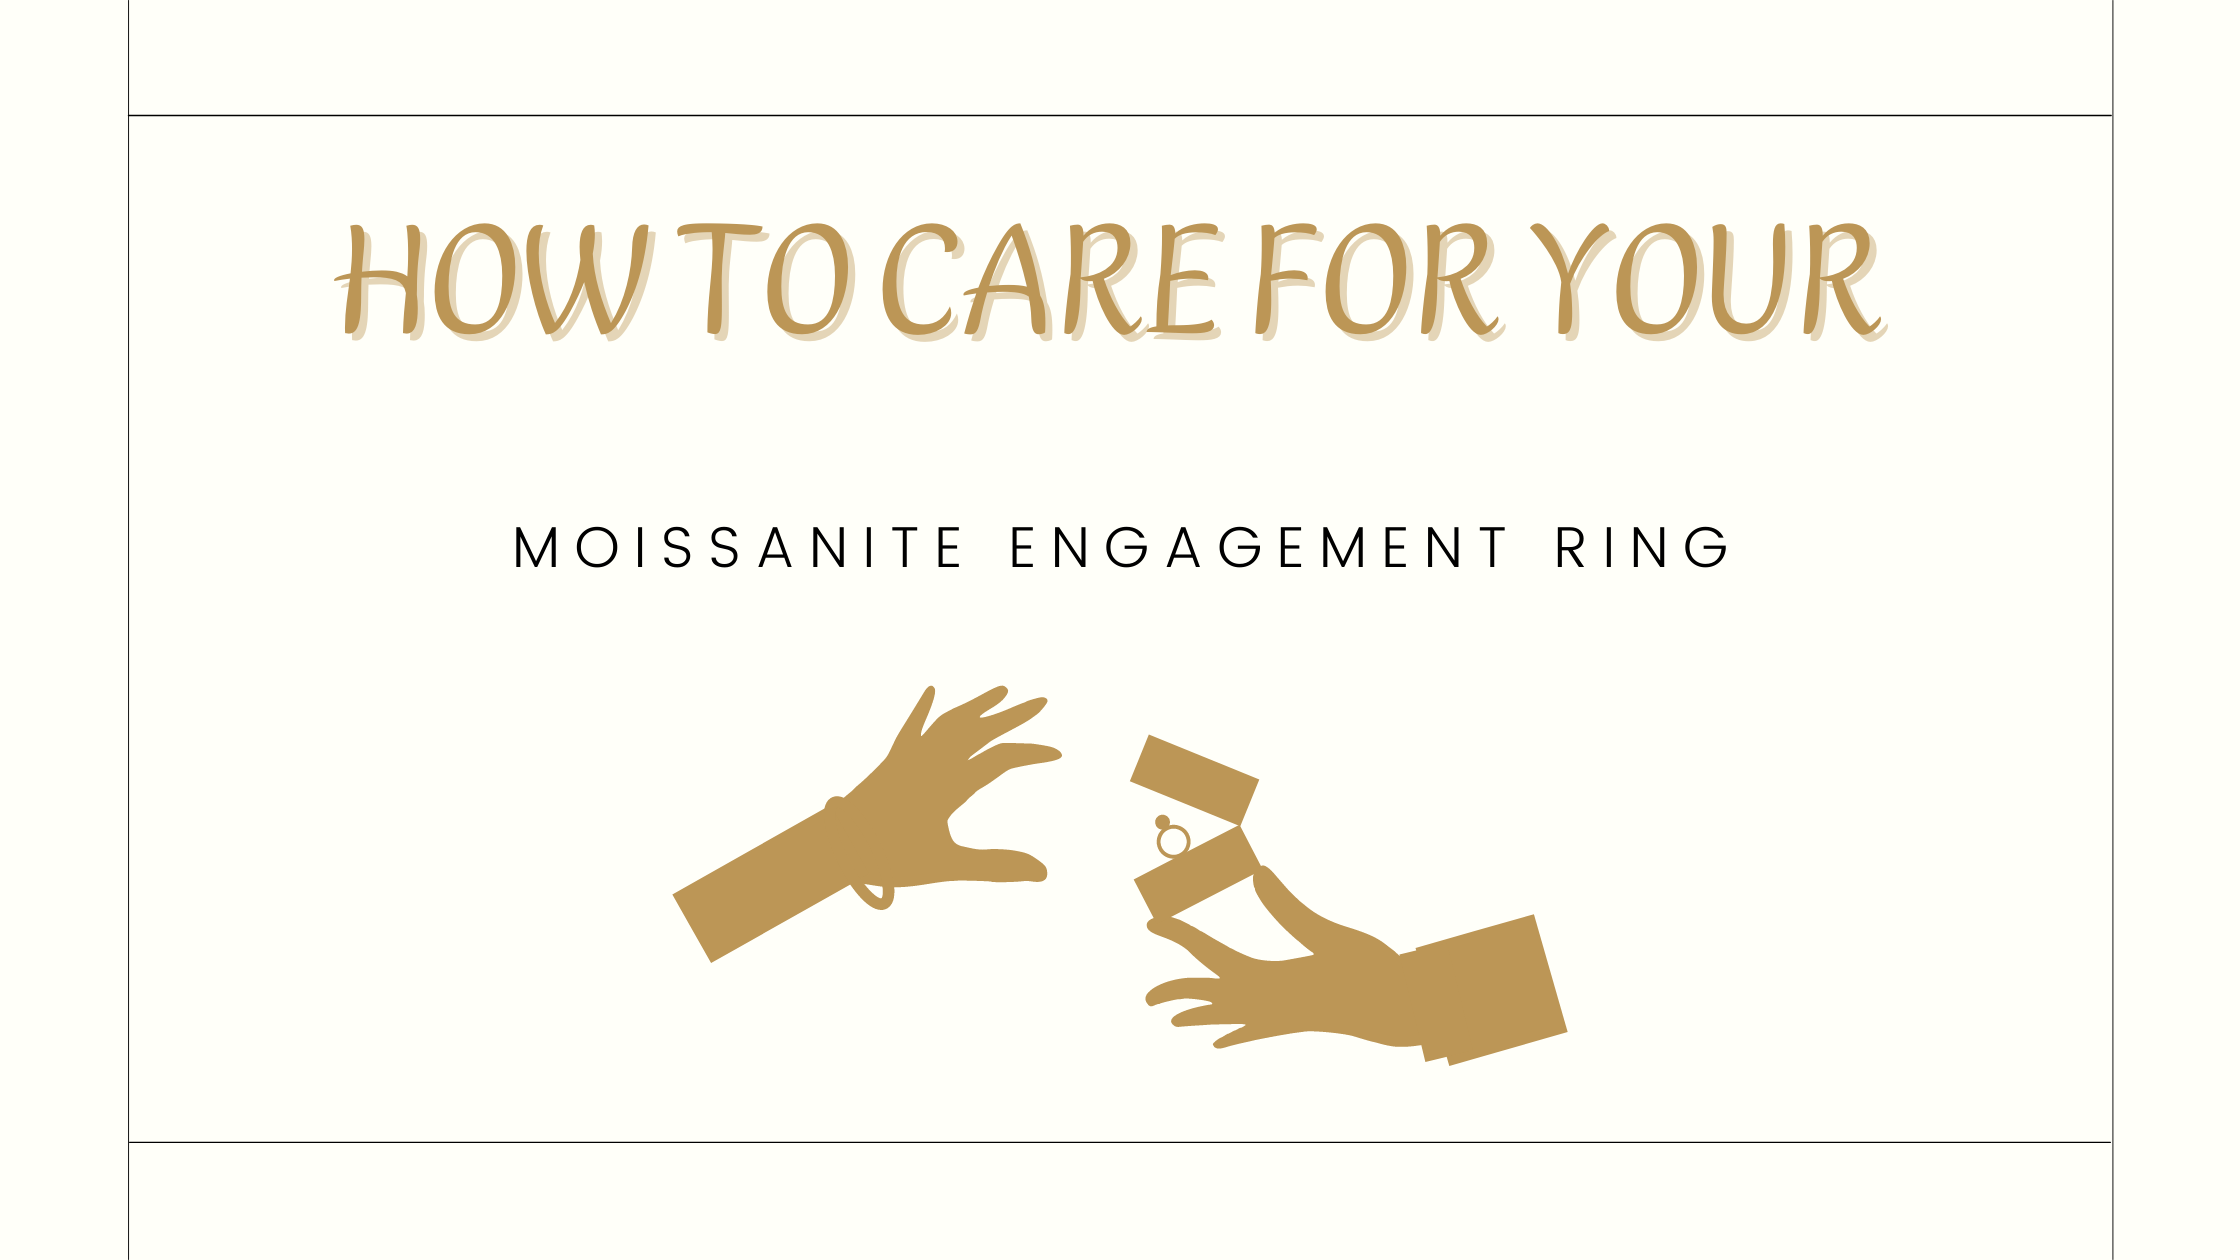 How To Care for Your Moissanite Engagement Ring